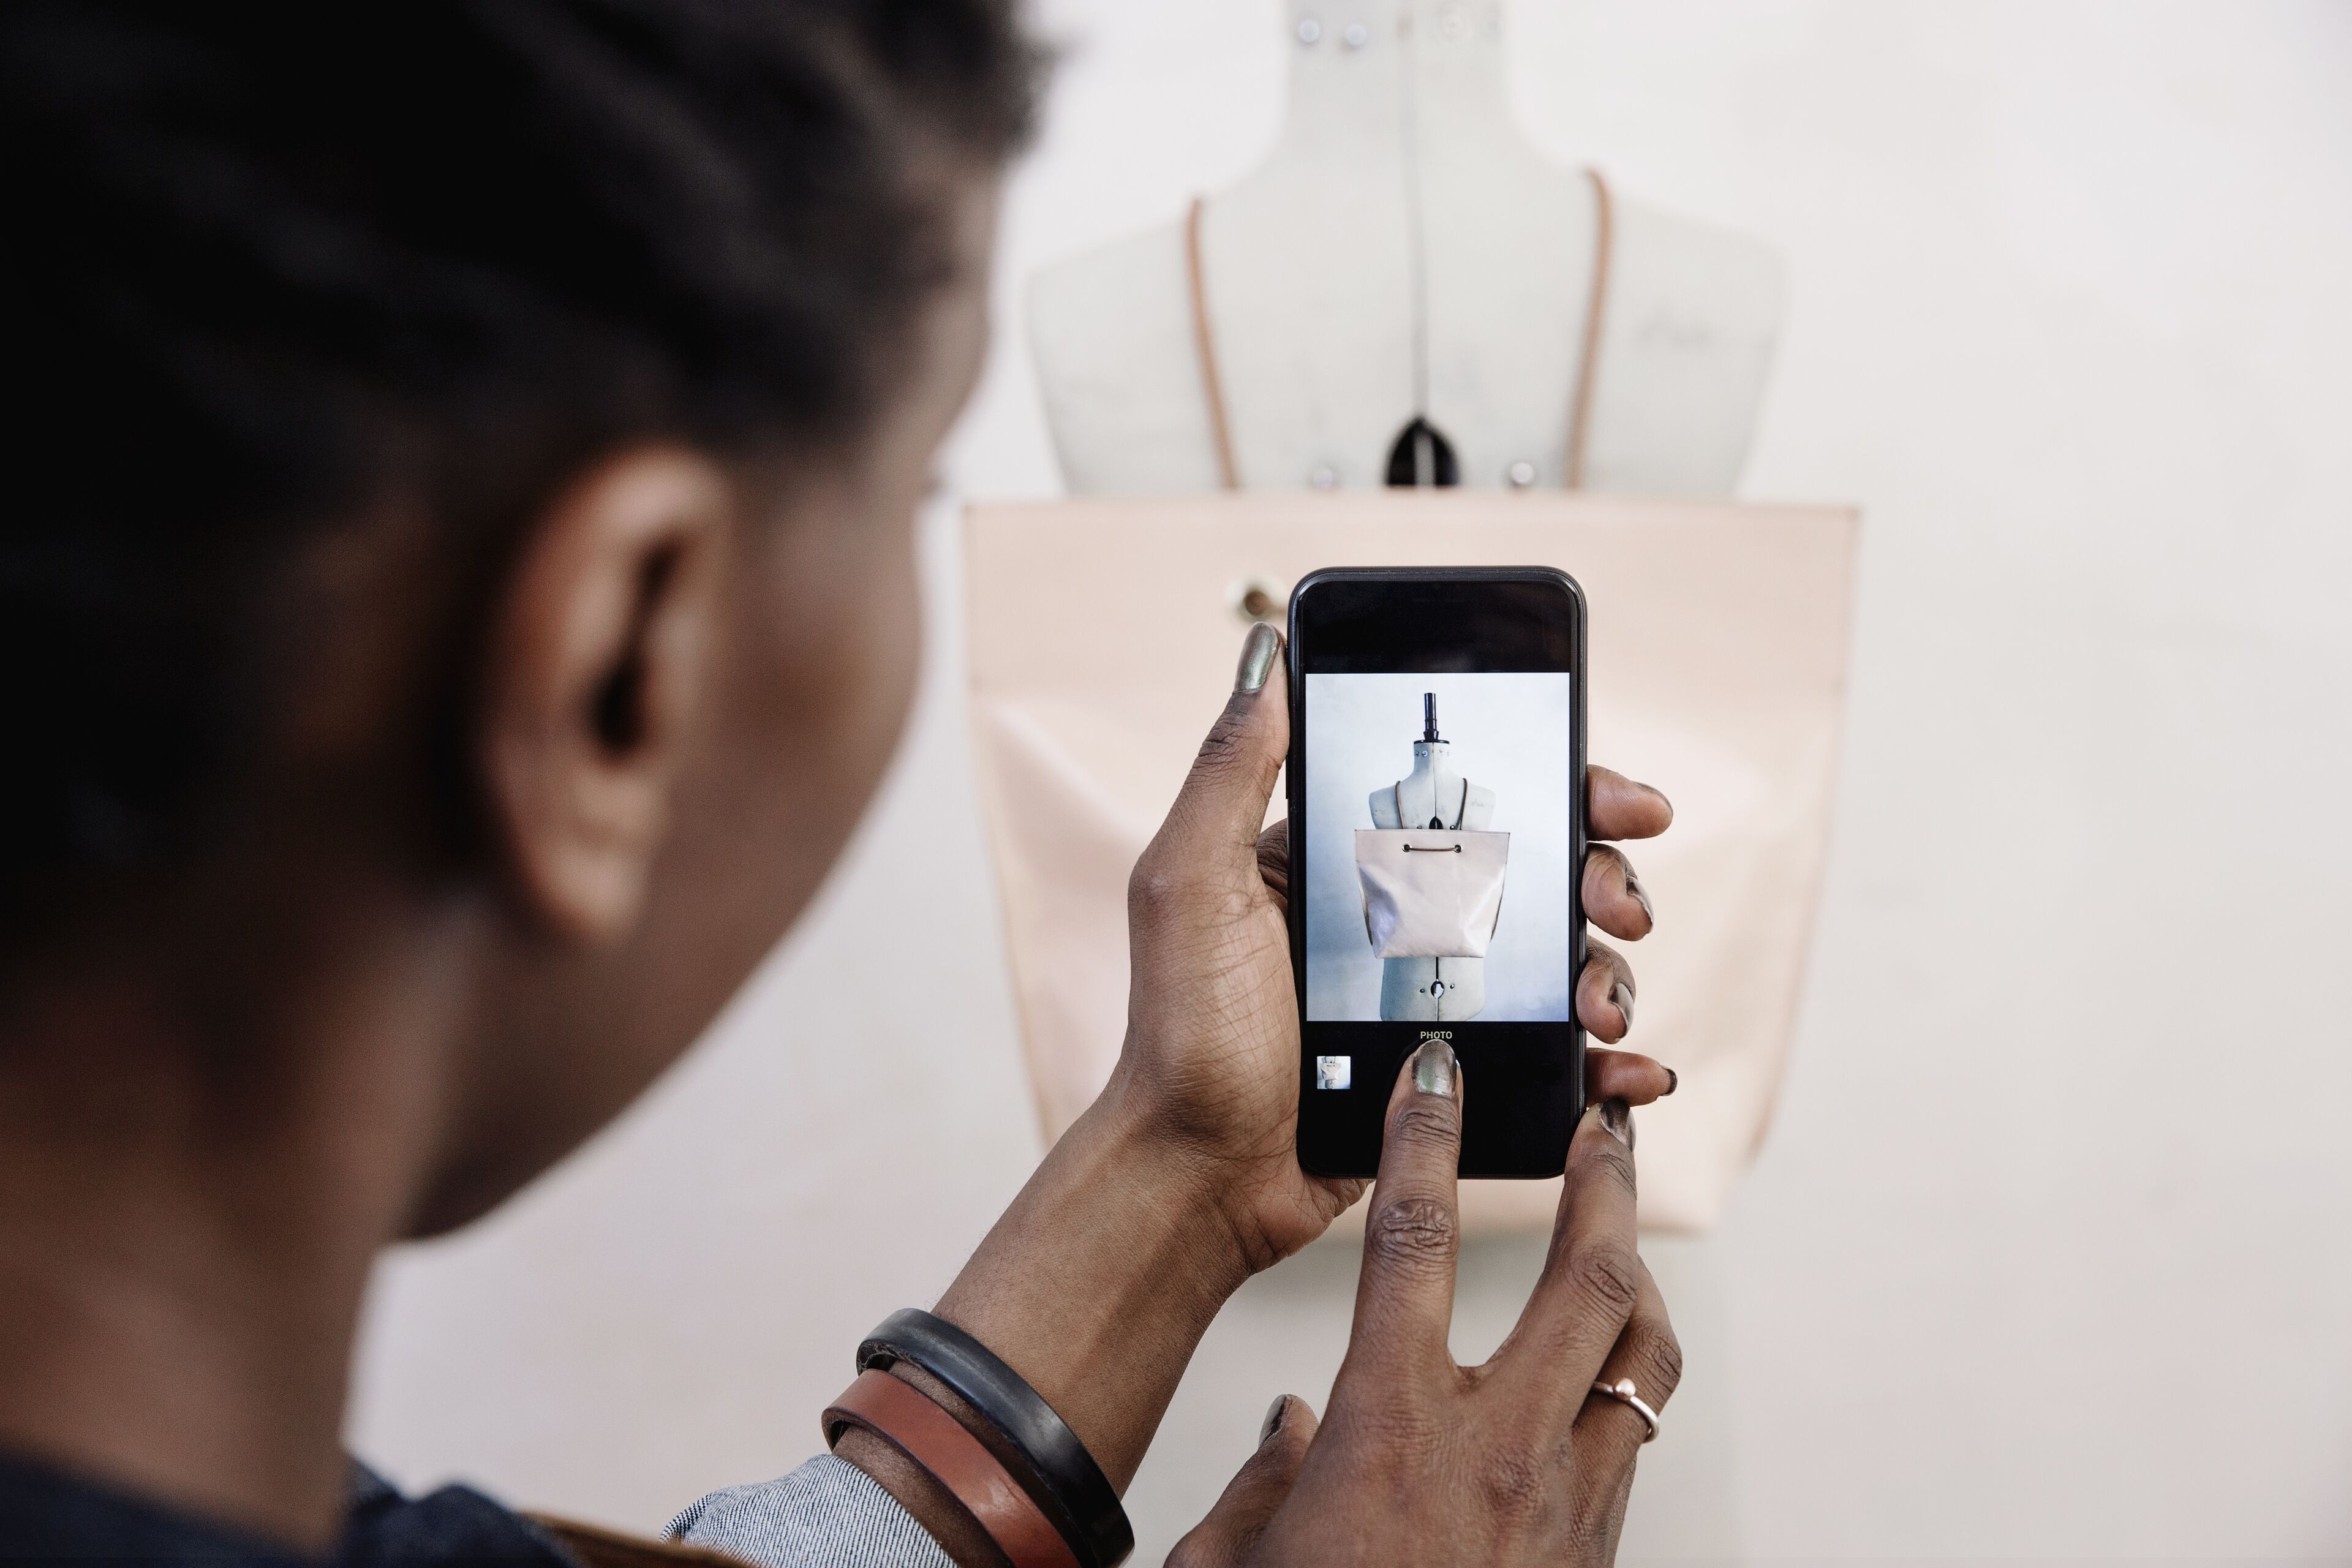 ImageA person captures a mannequin on a smartphone, blending fashion design with digital tools.